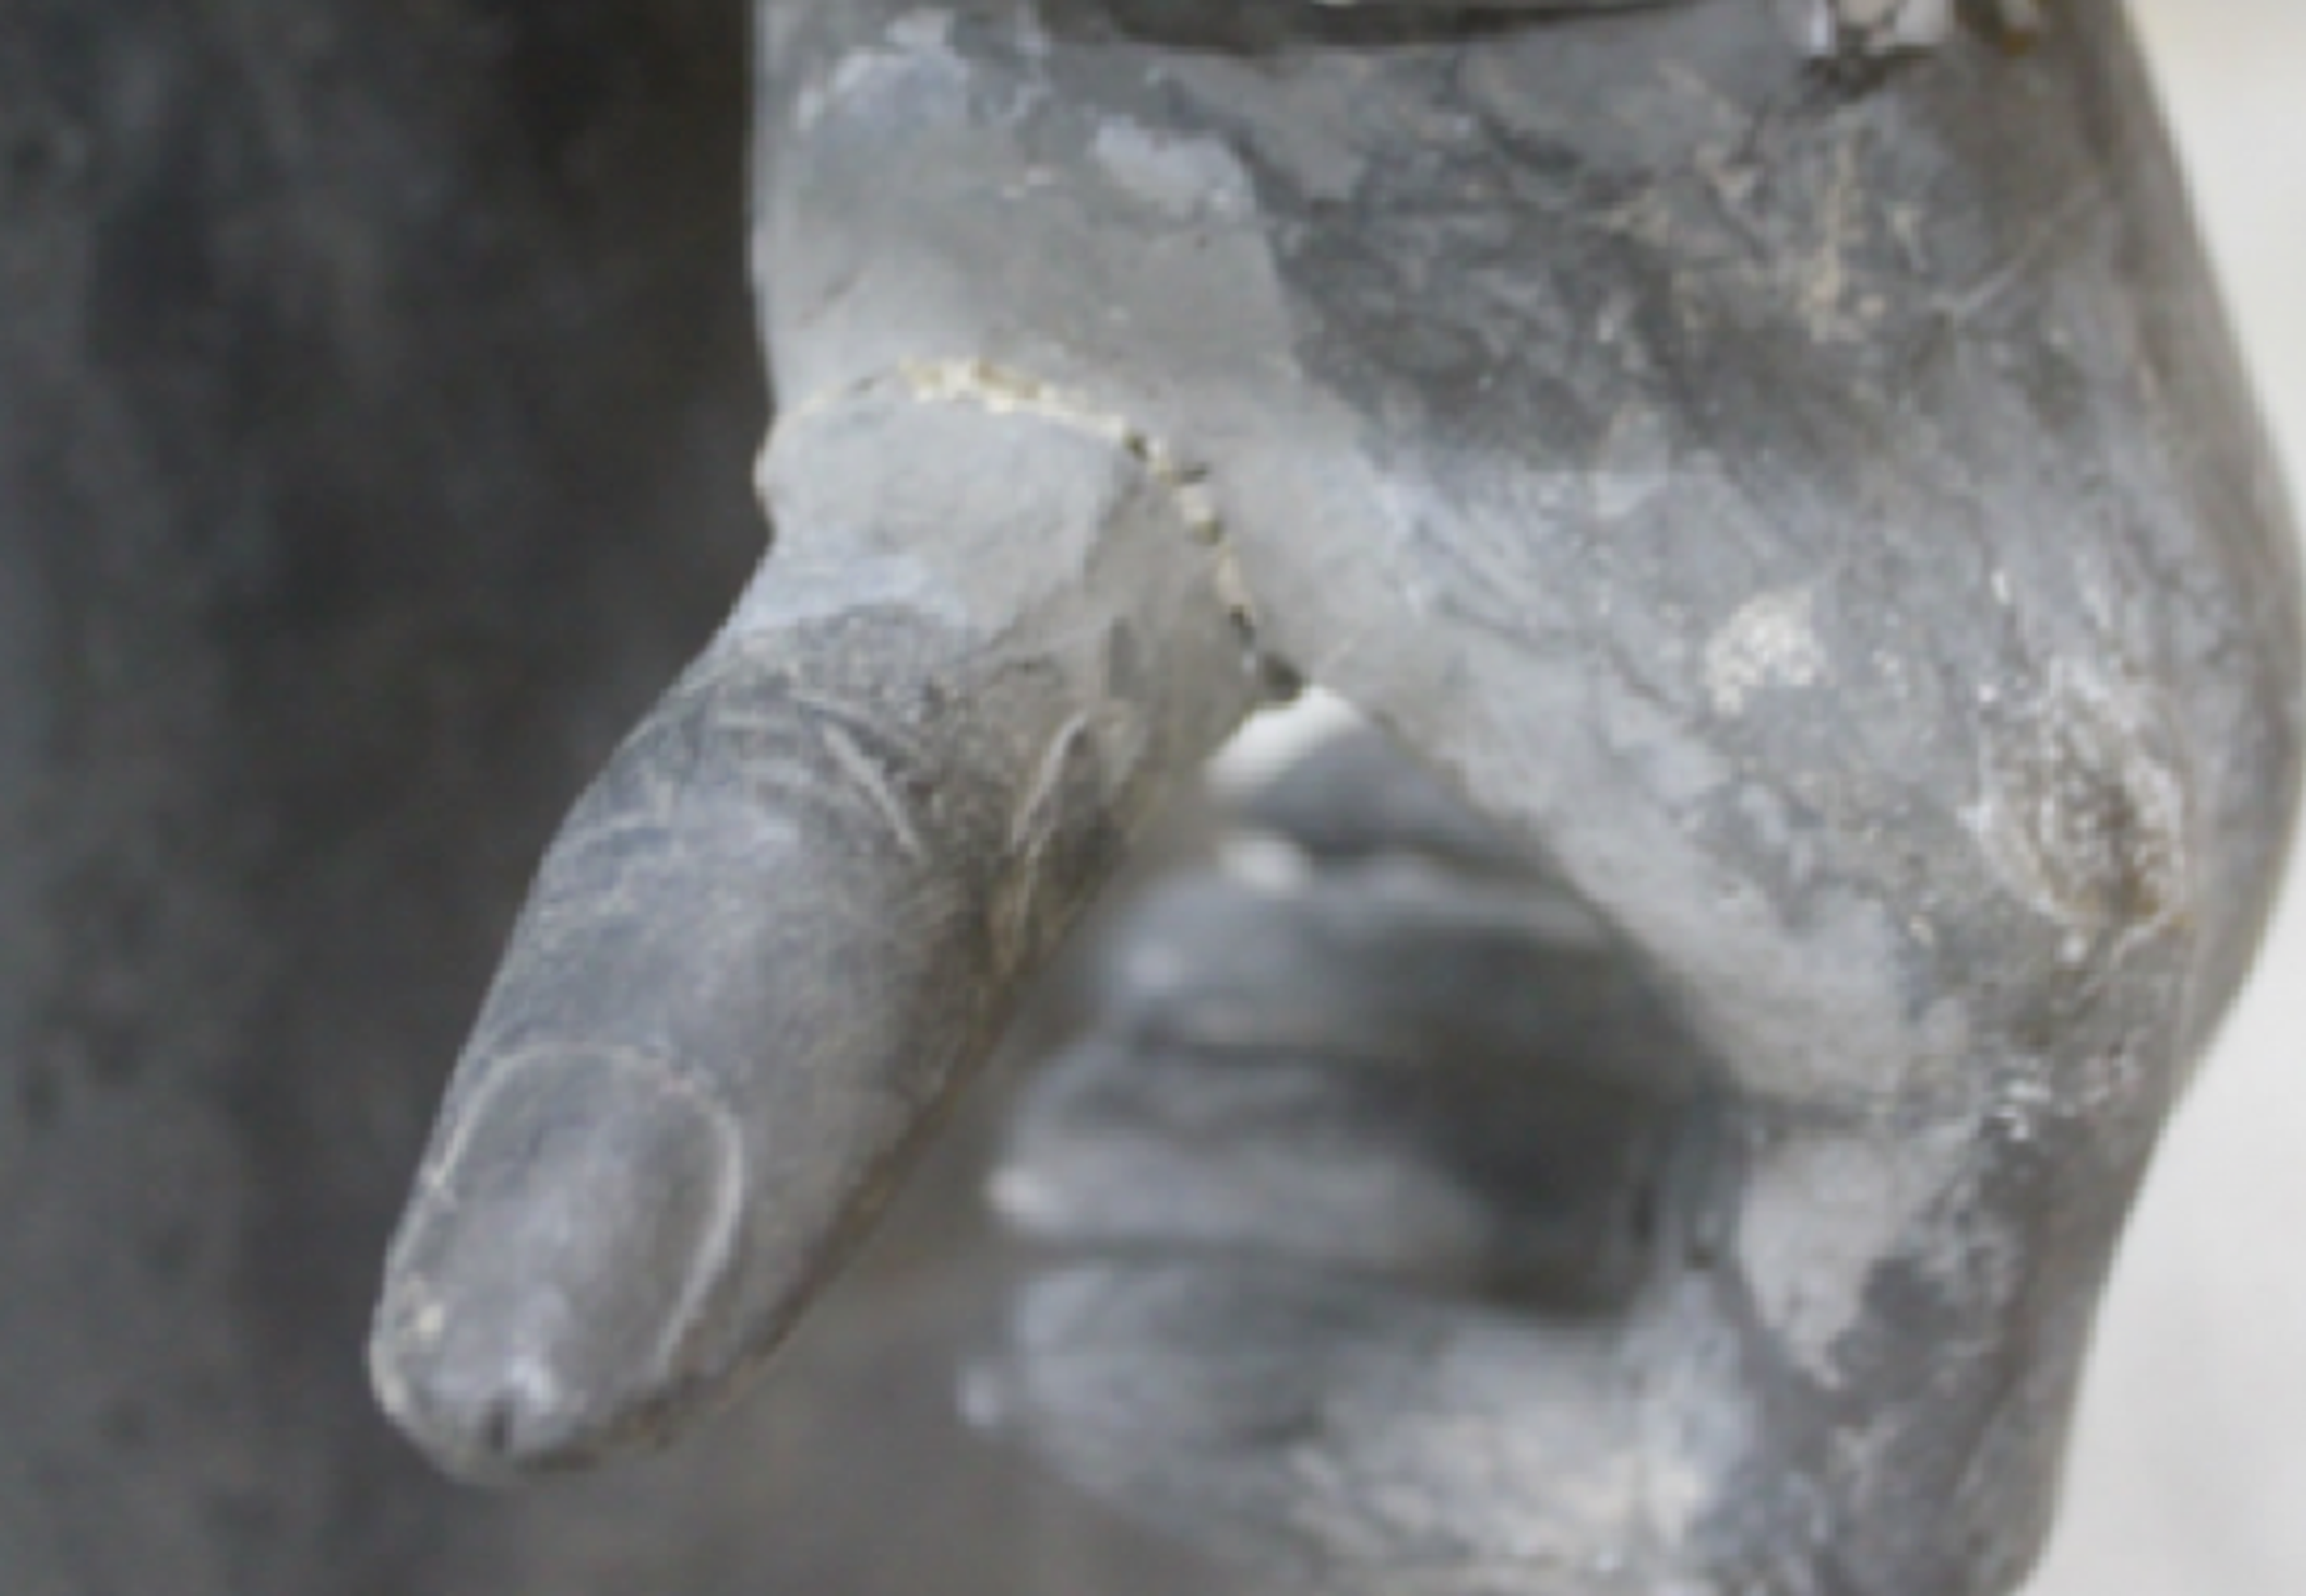 A photo shows the thumb that was later taken from a statue at The Franklin Institute in Philadelphia.